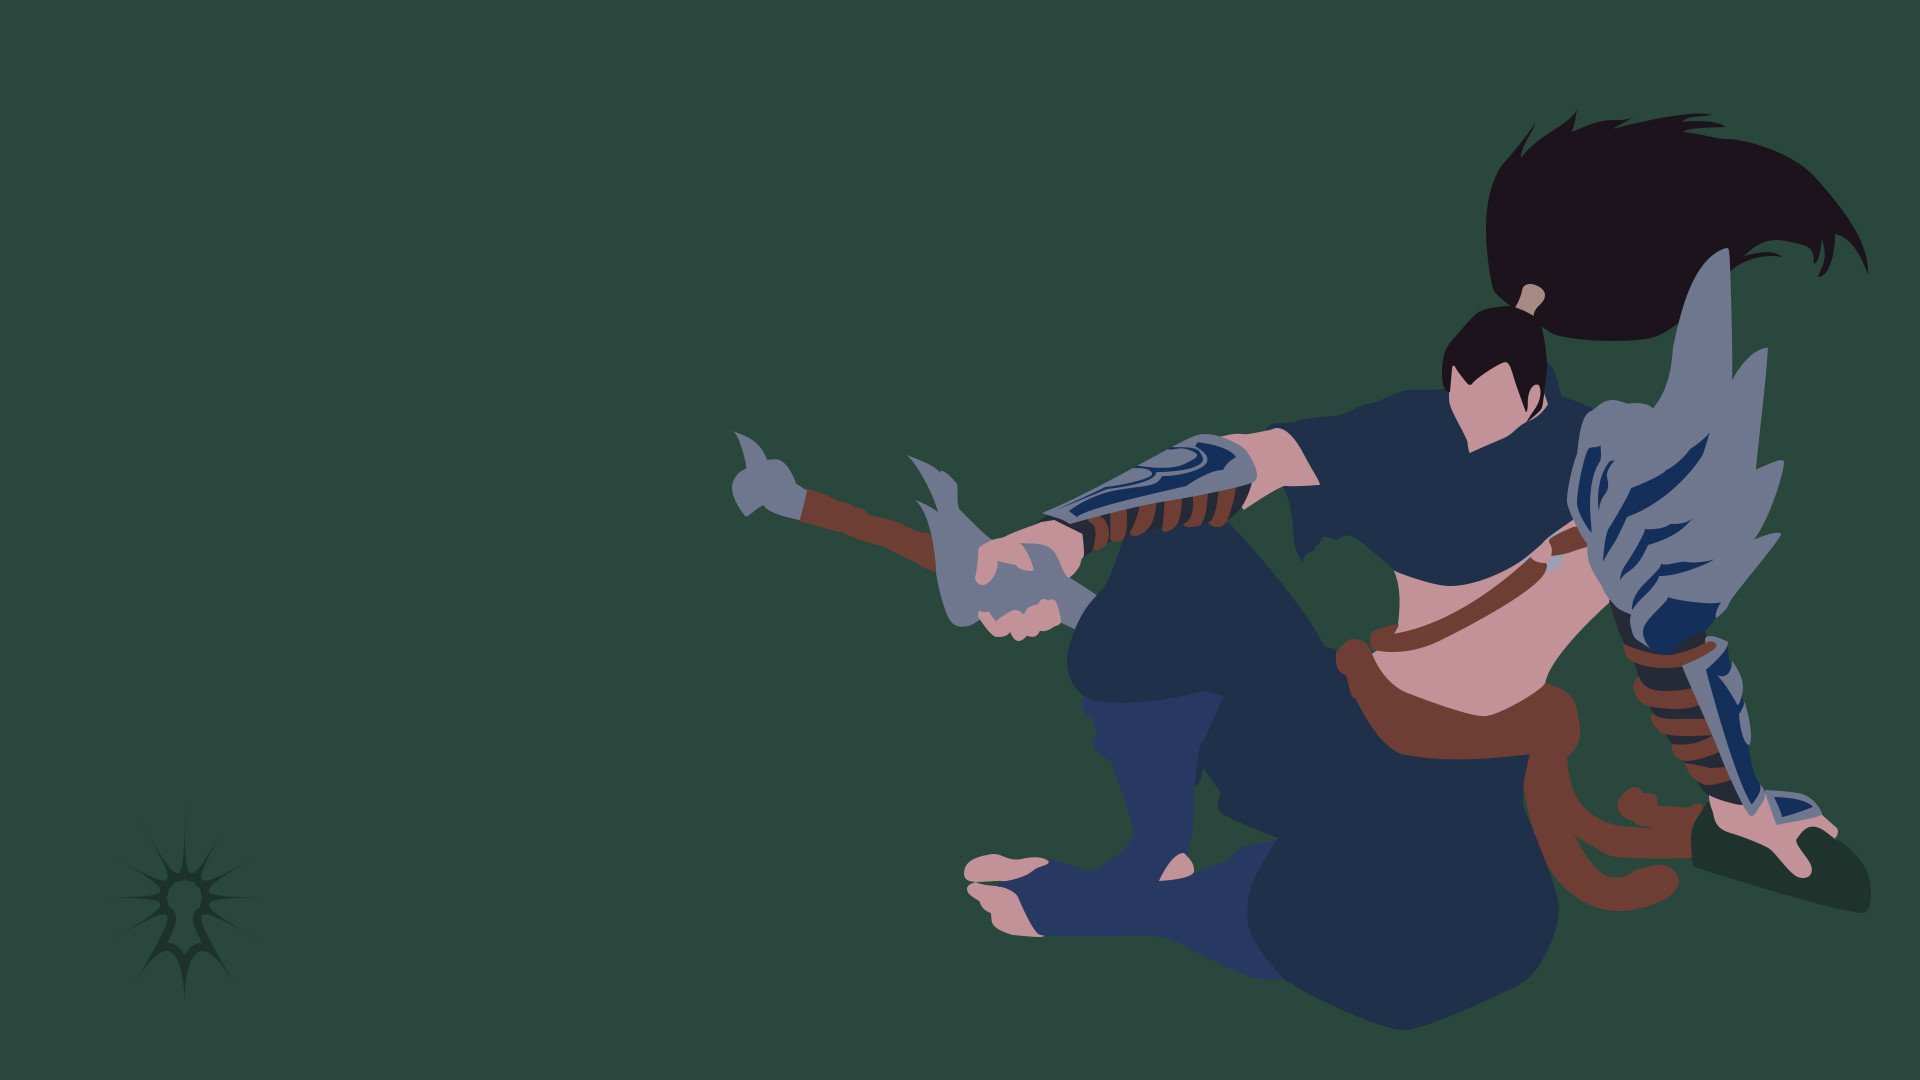 1920x1080 ... Yasuo - League of Legends by Nateag